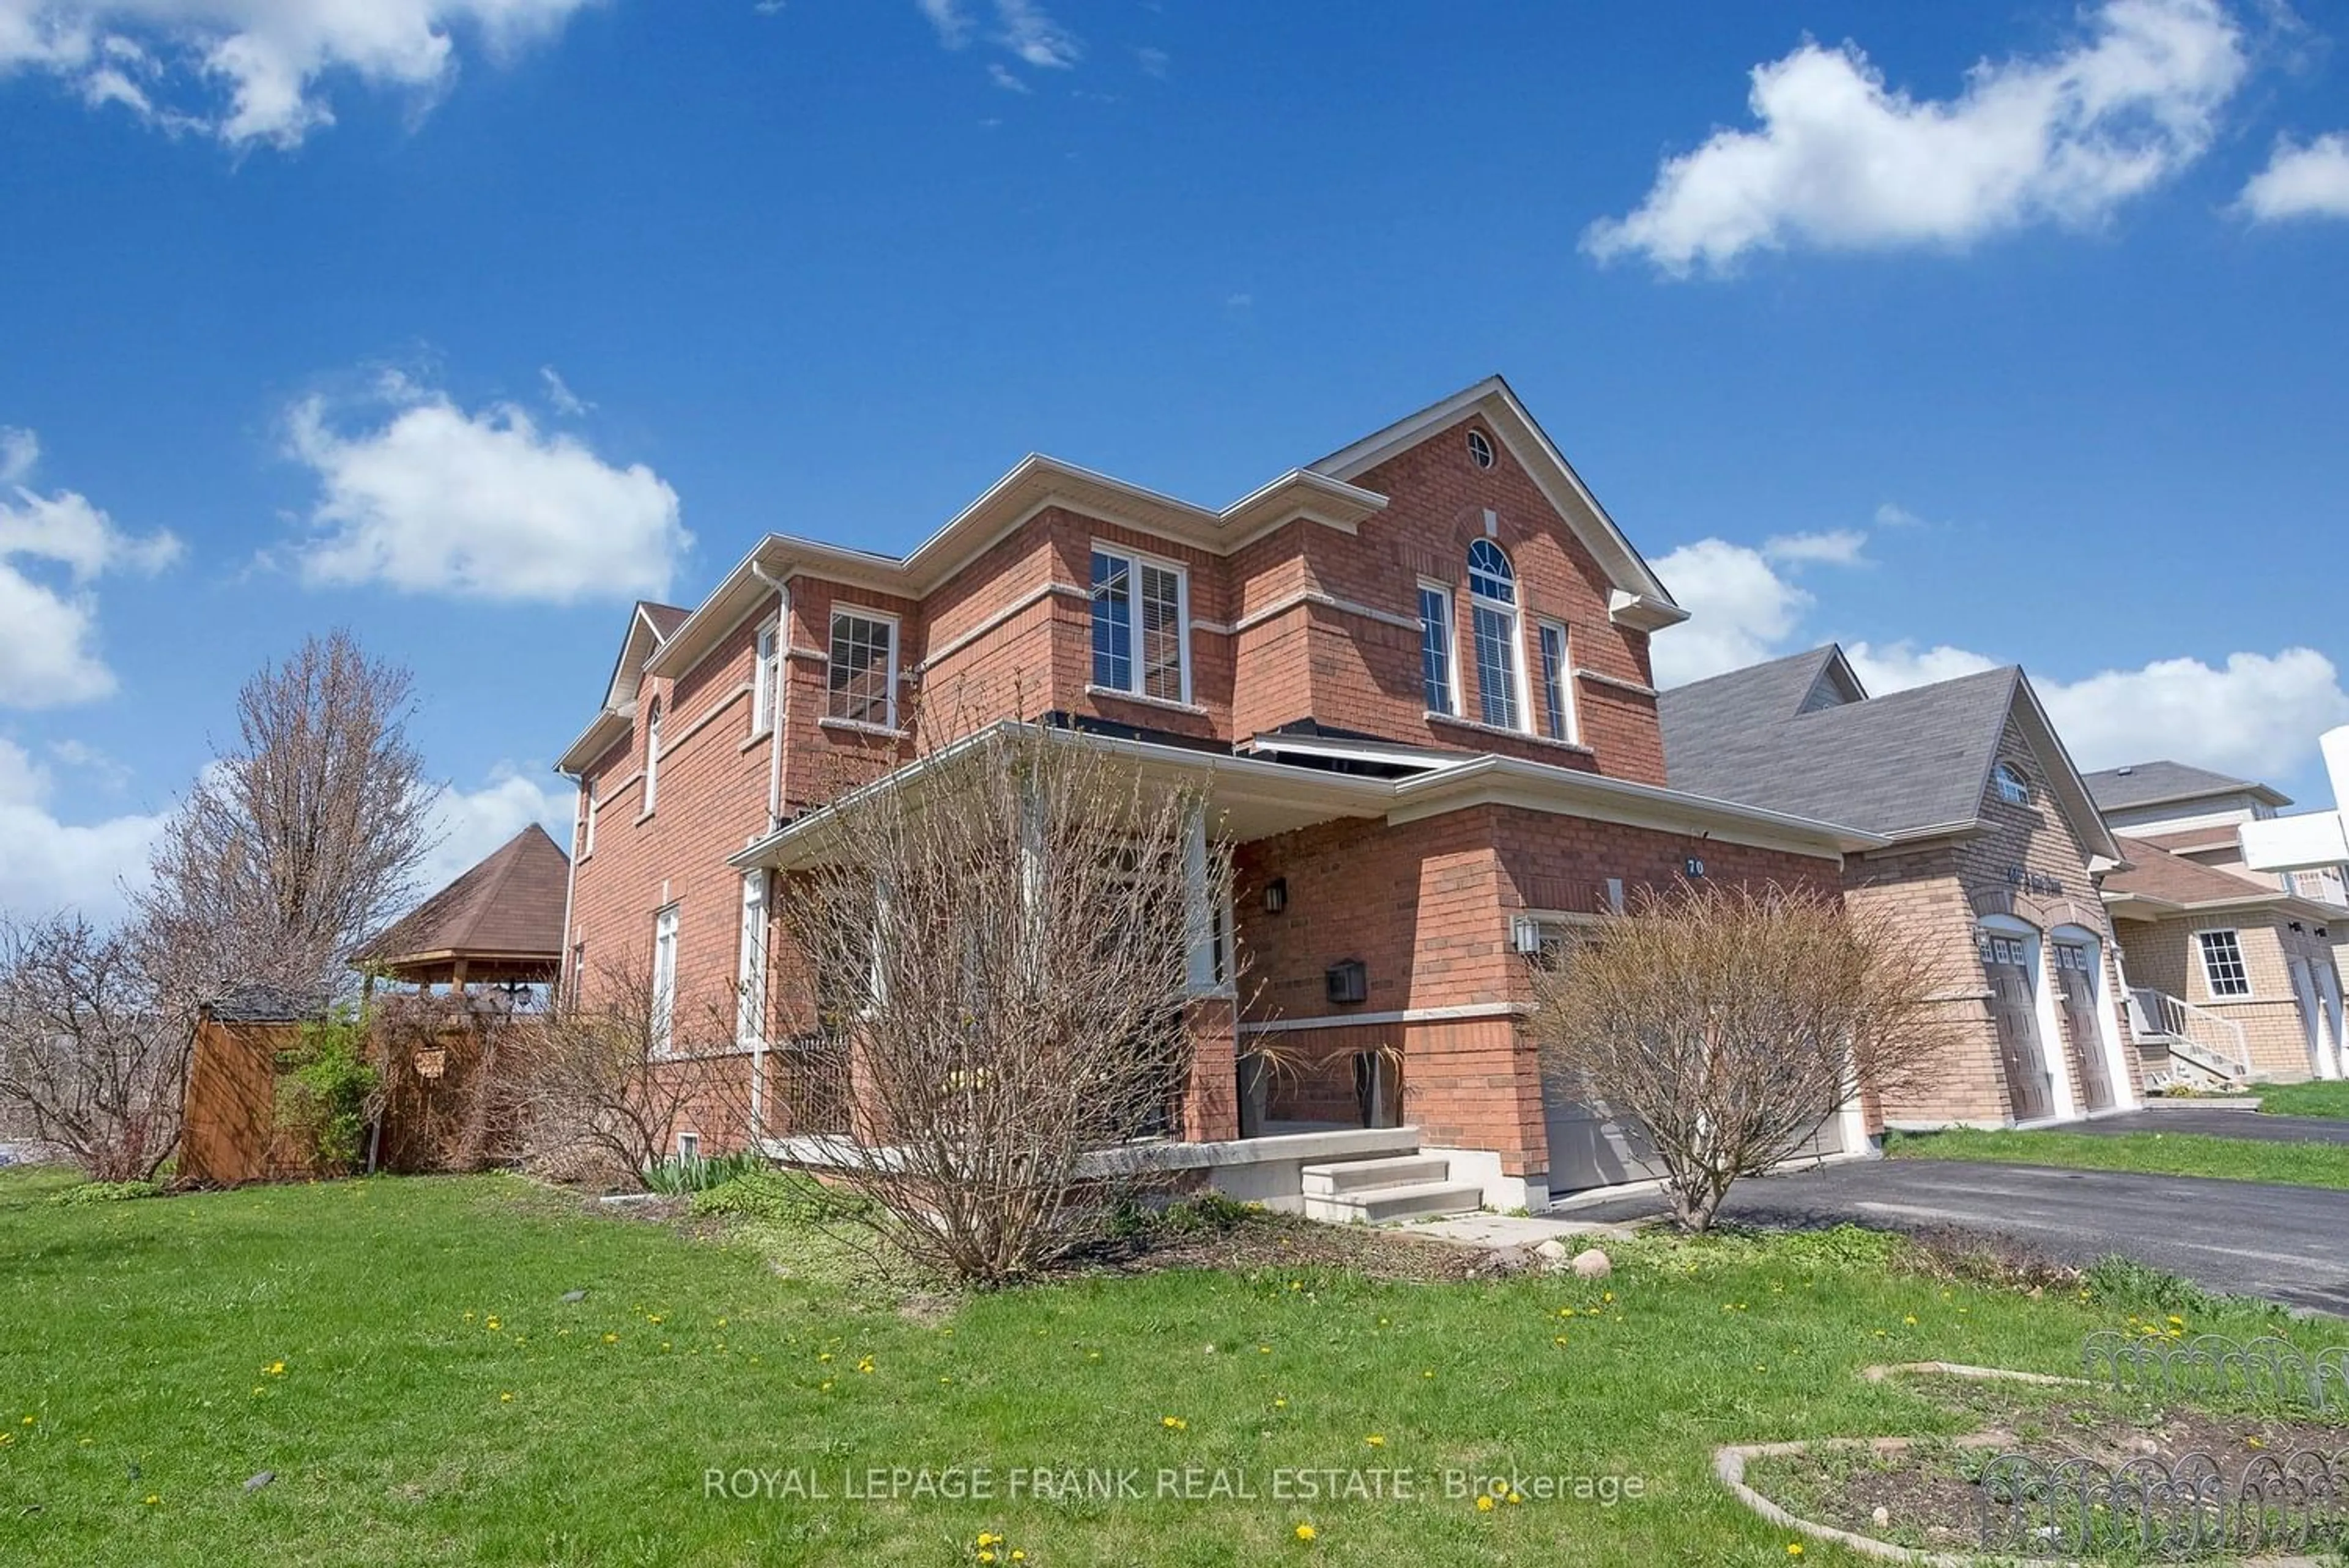 Home with brick exterior material for 70 Albert St, Clarington Ontario L1C 0A8